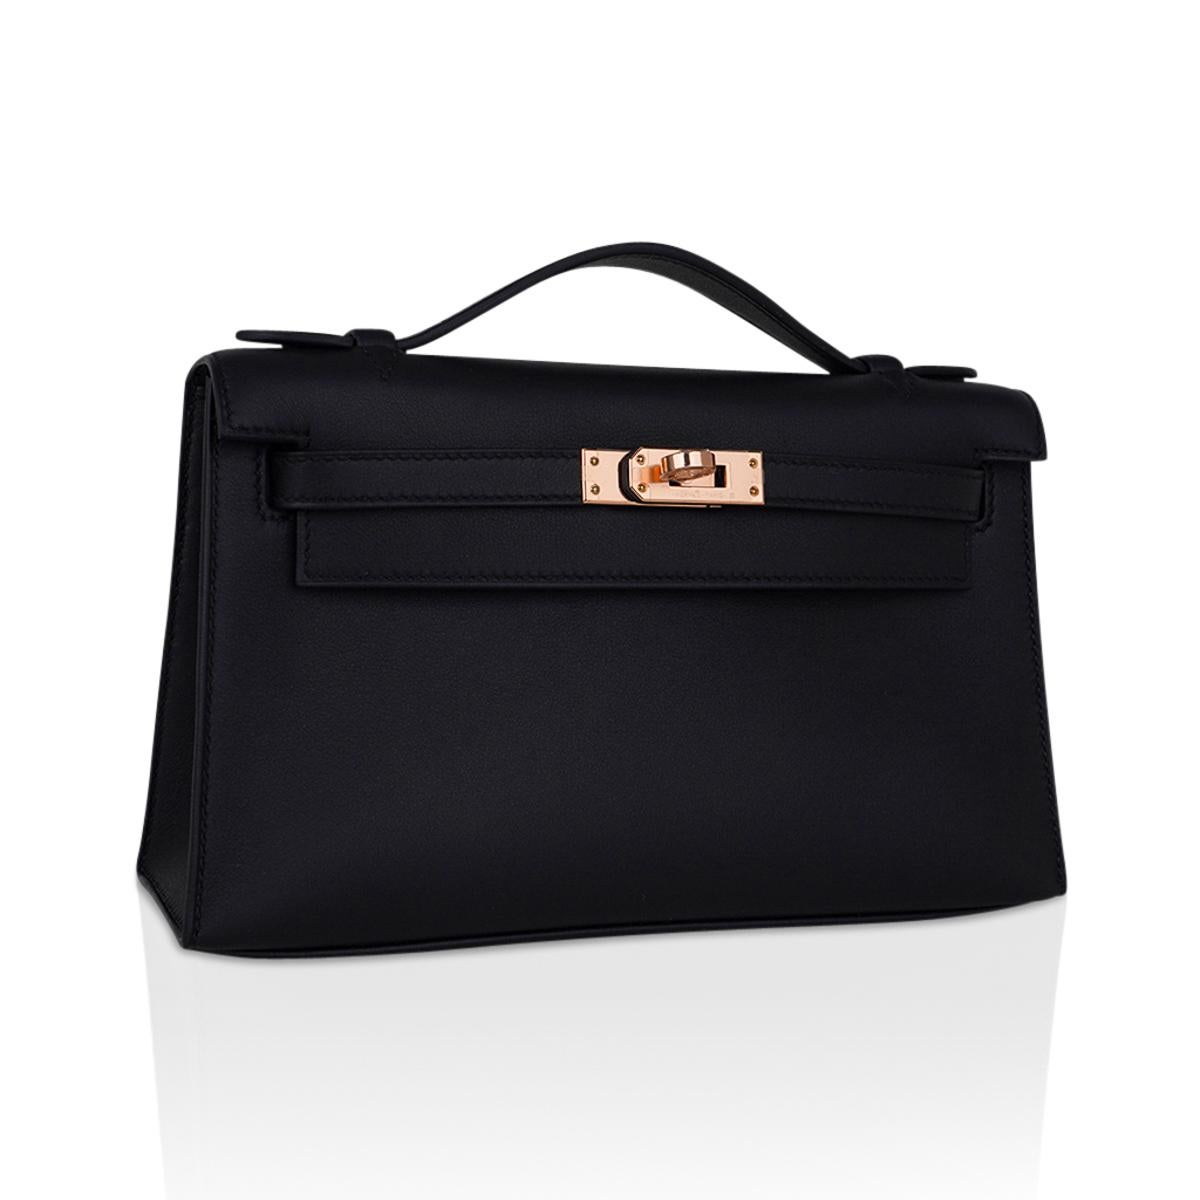 Mightychic offers an Hermes Kelly pochette bag featured in sleek Black Swift leather.
This beautiful Hermes clutch is accentuated with warm Rose Gold hardware.
Signature stamp on interior.
Small interior compartment.
Comes with signature Hermes box